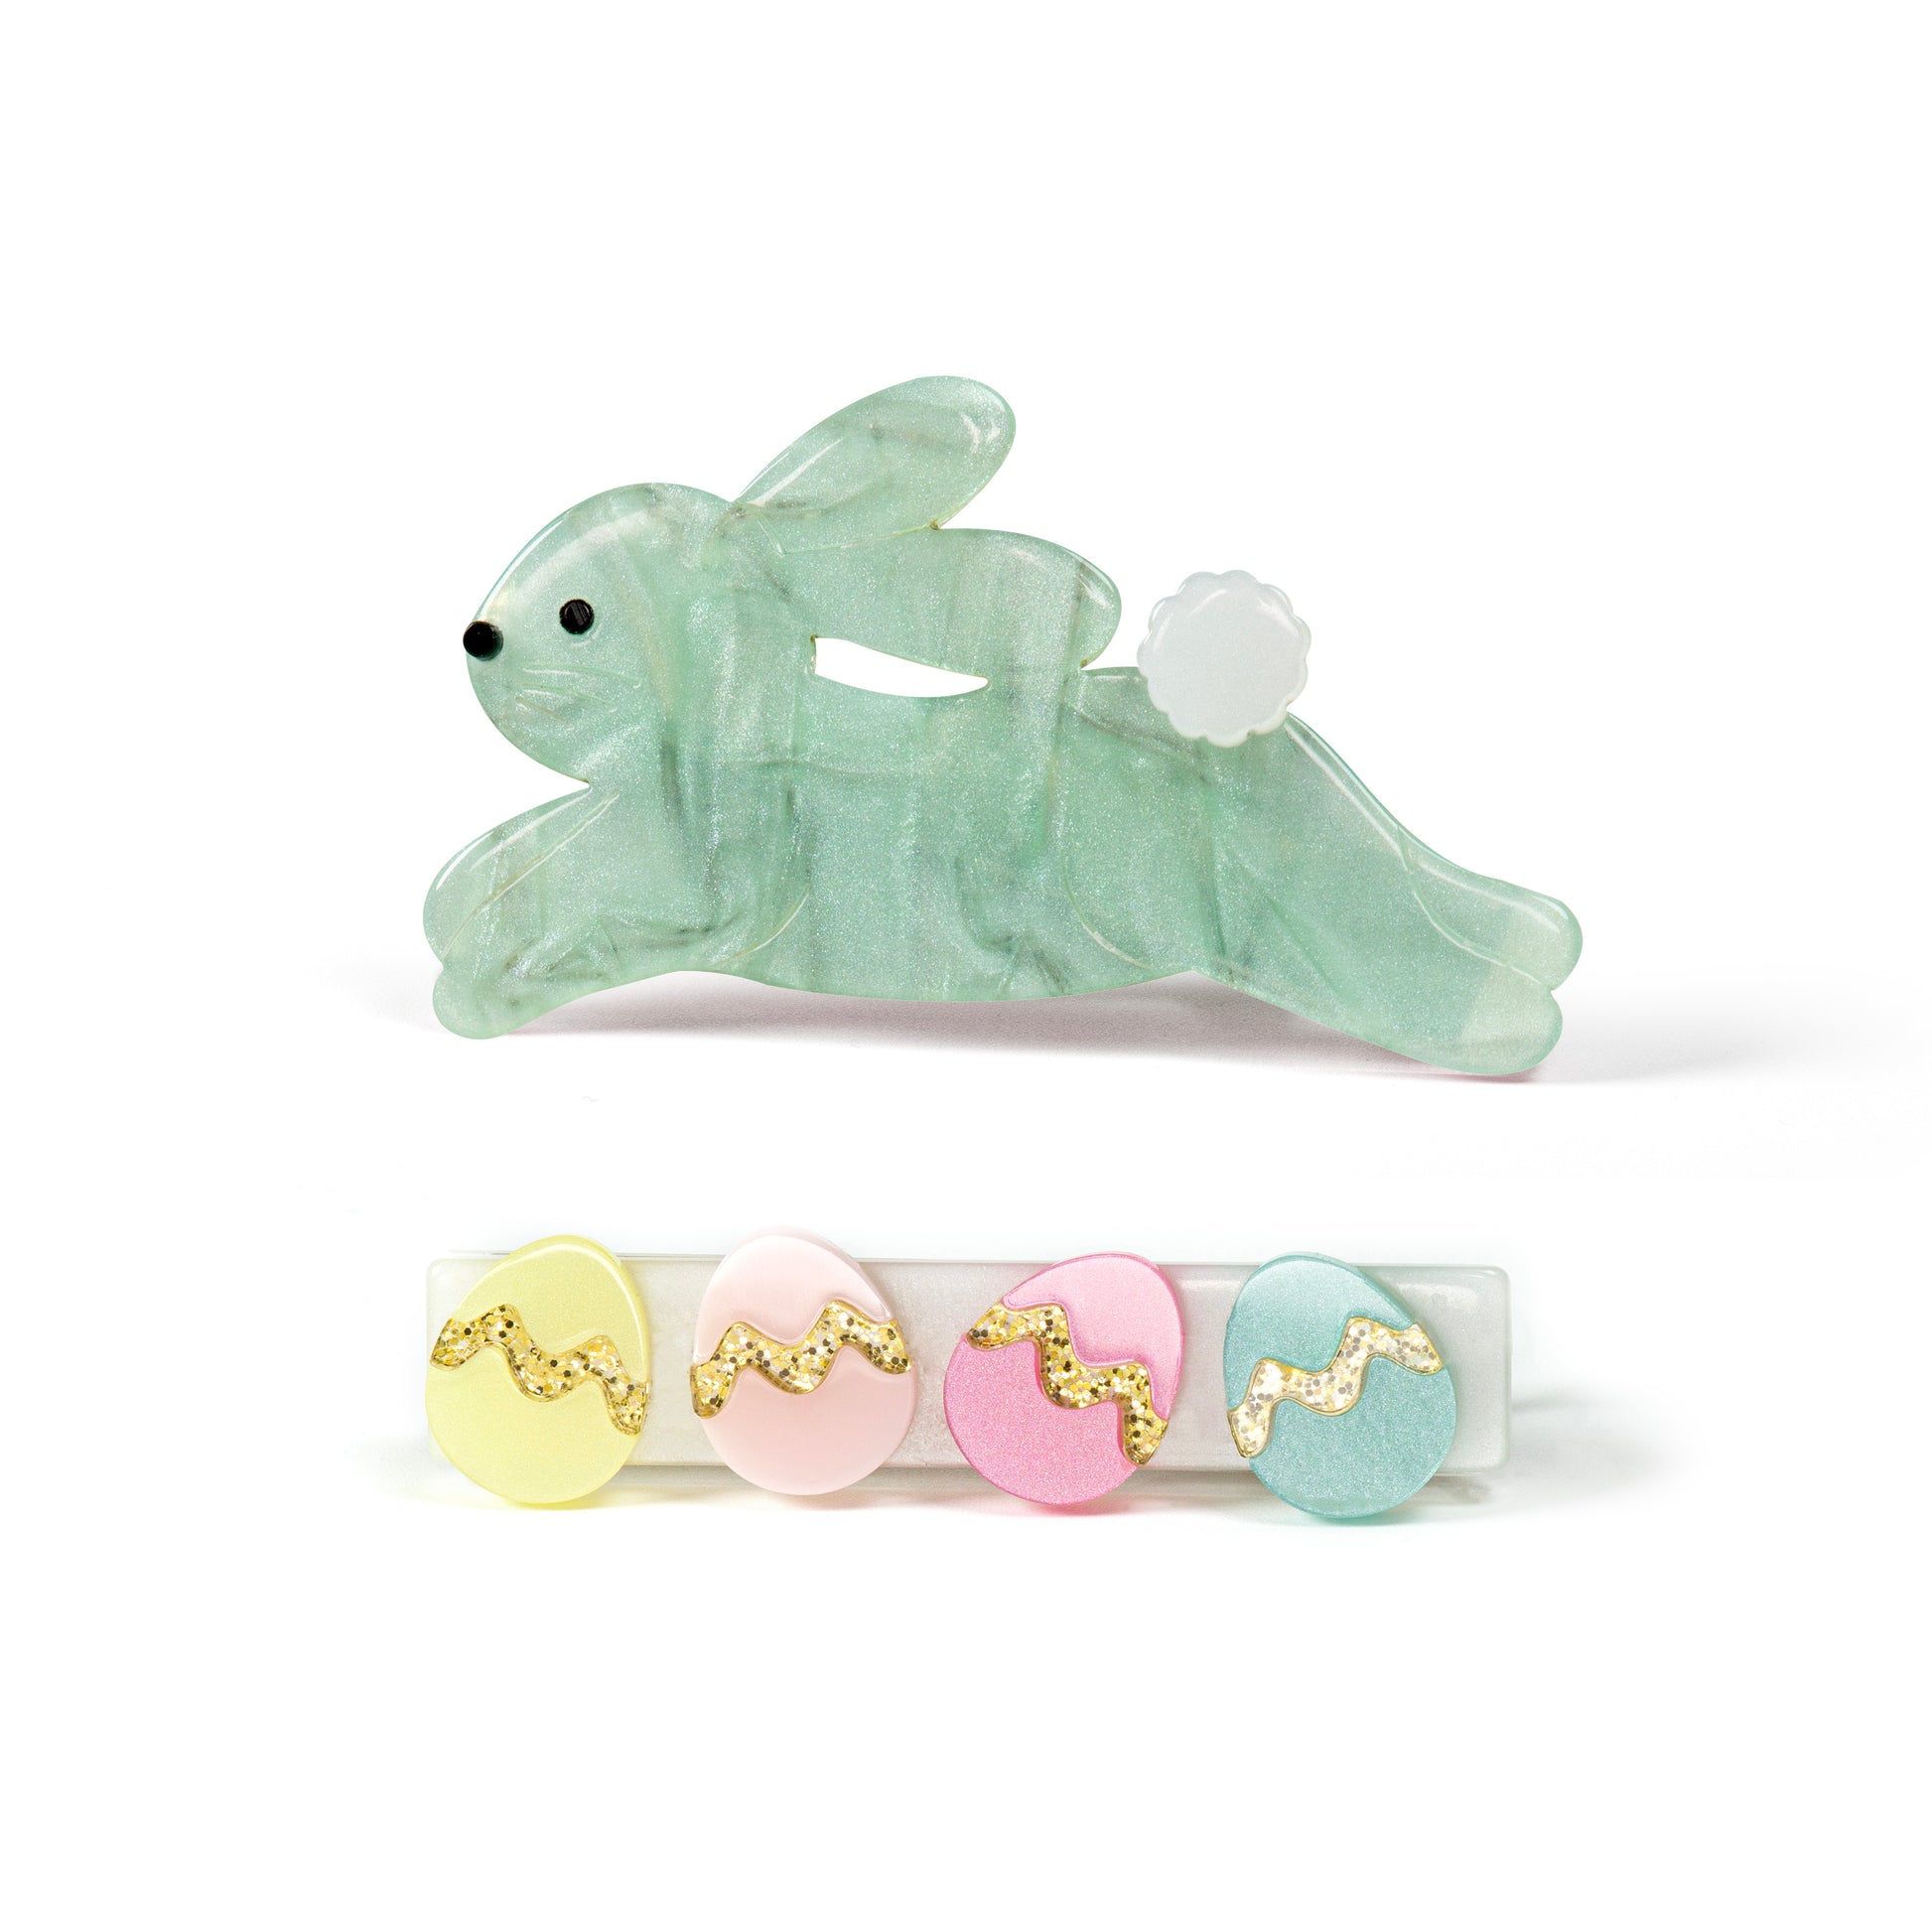 Pair of hair clips. One of them is adorned with a pearlized green bunny in hopping motion. The second one has 4 Easter eggs in pastel colors.